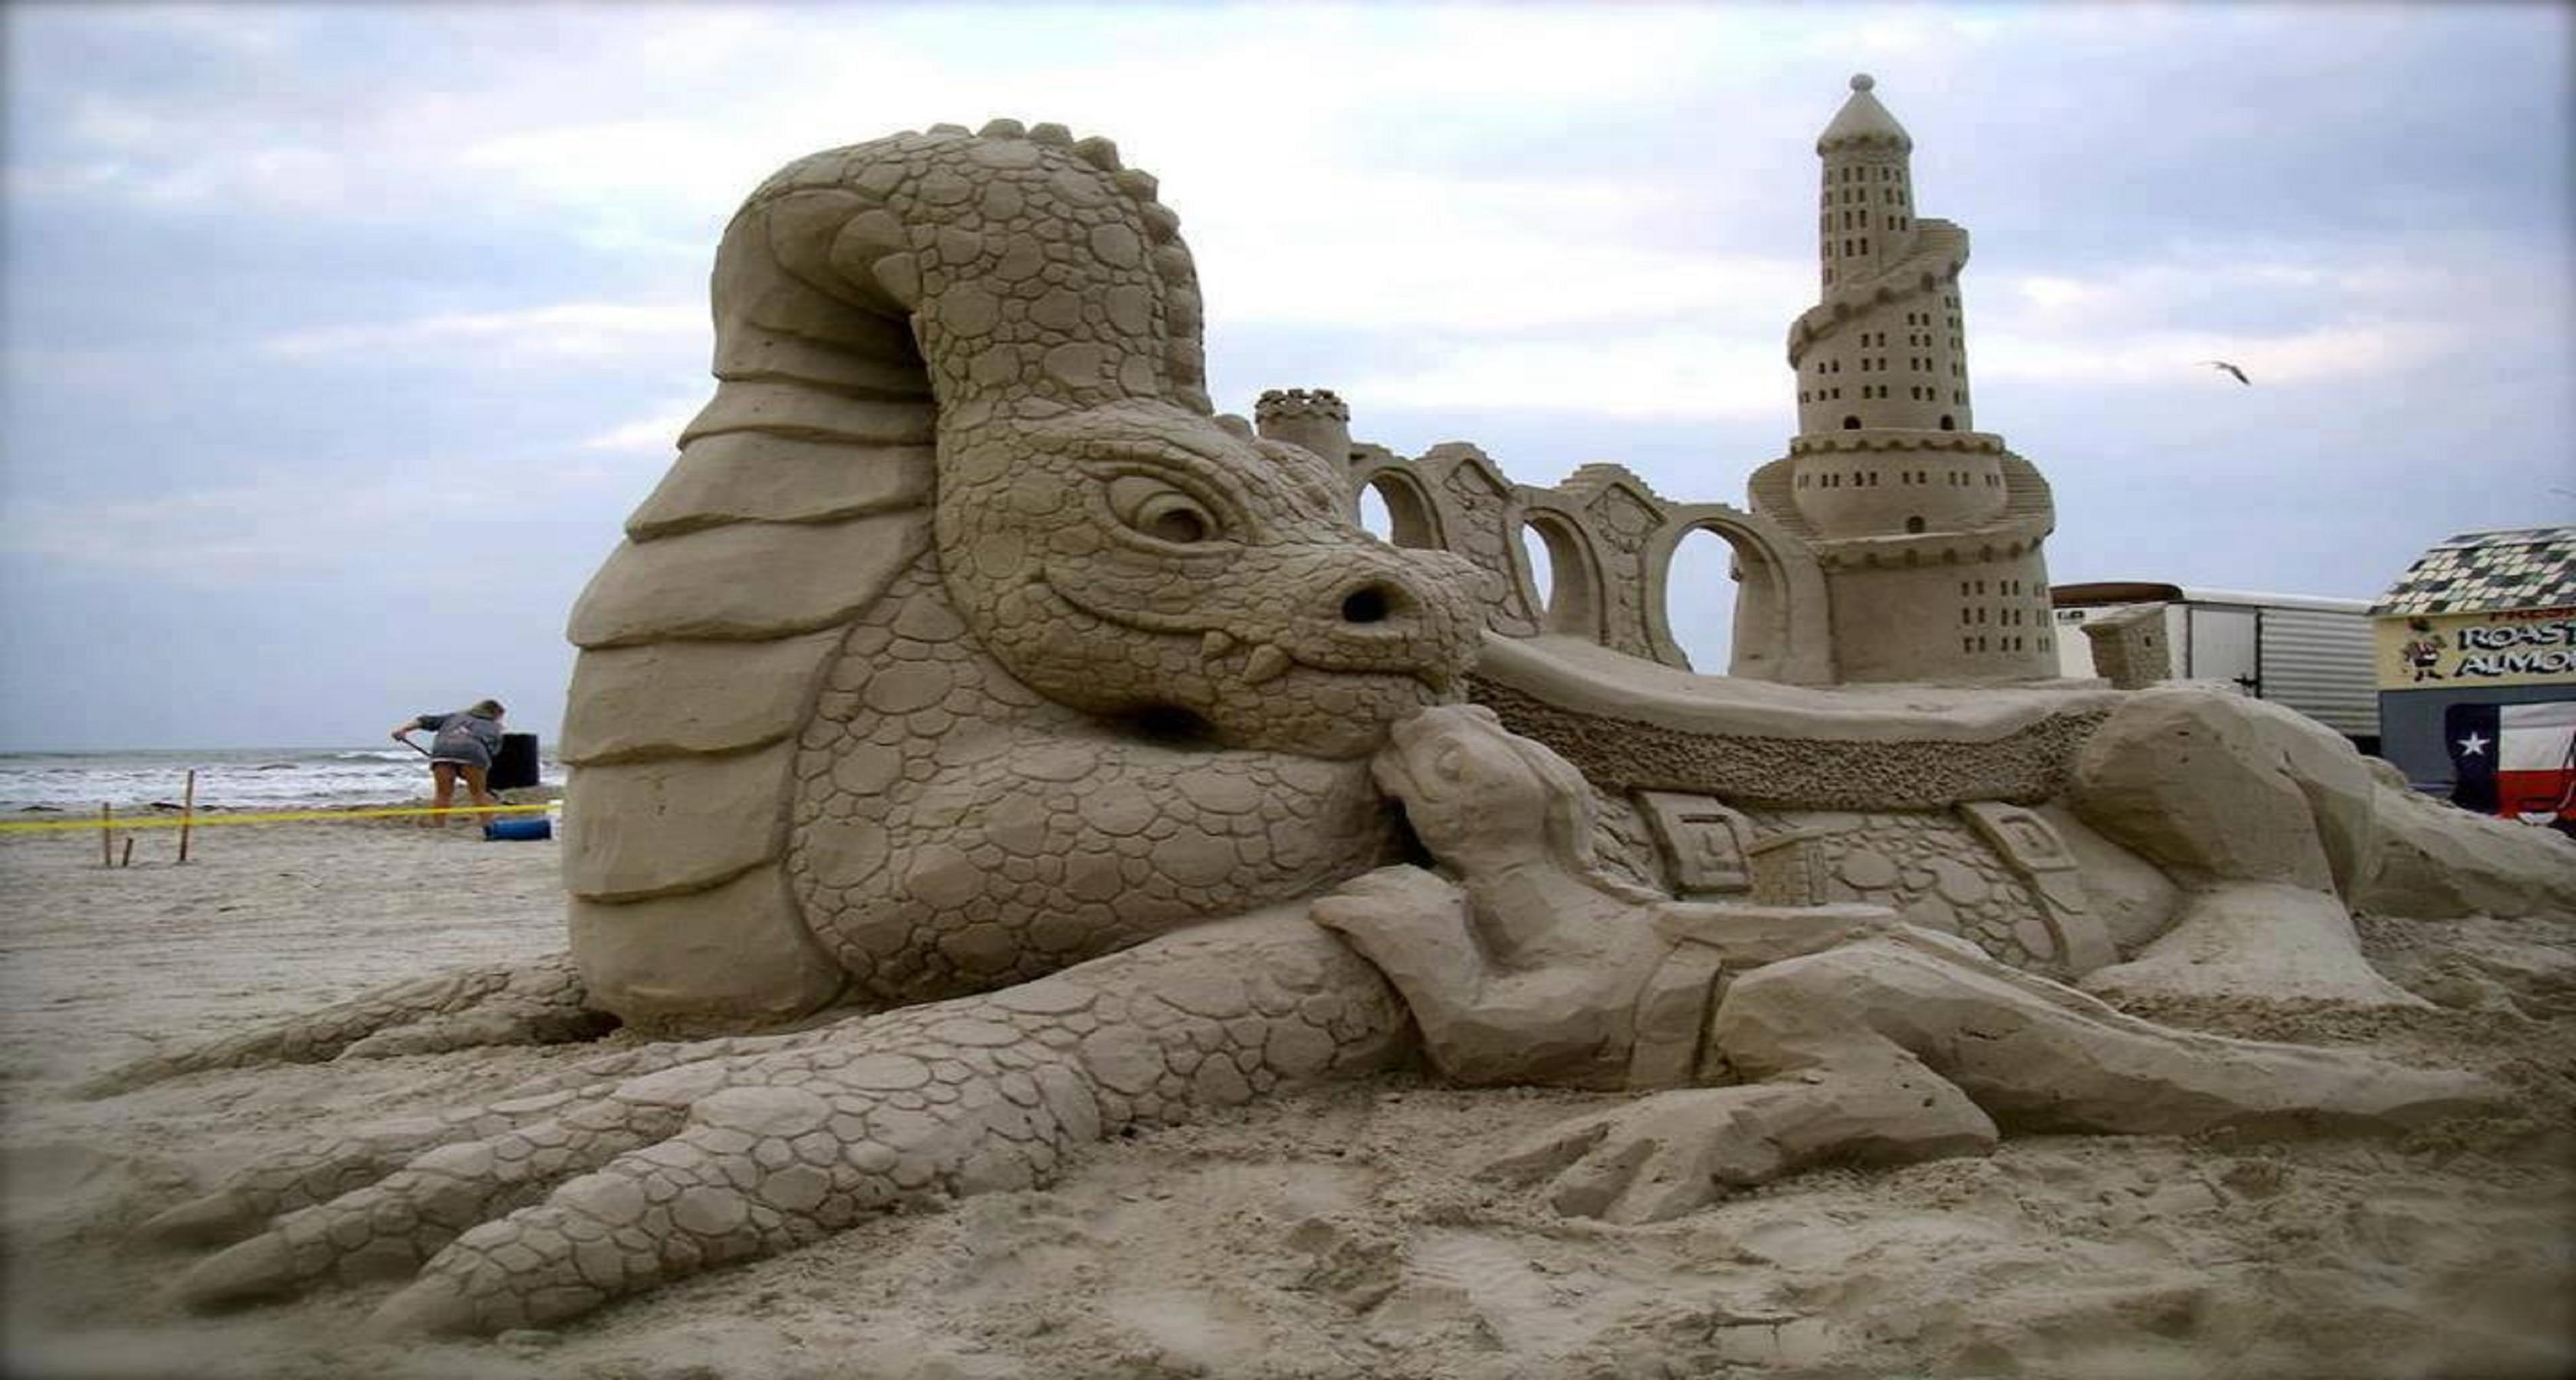 Free download The sand castle 152533 High Quality and Resolution Wallpaper [3360x1800] for your Desktop, Mobile & Tablet. Explore Sand Castle Wallpaper. Hogwarts Castle Wallpaper, Howl's Moving Castle Wallpaper